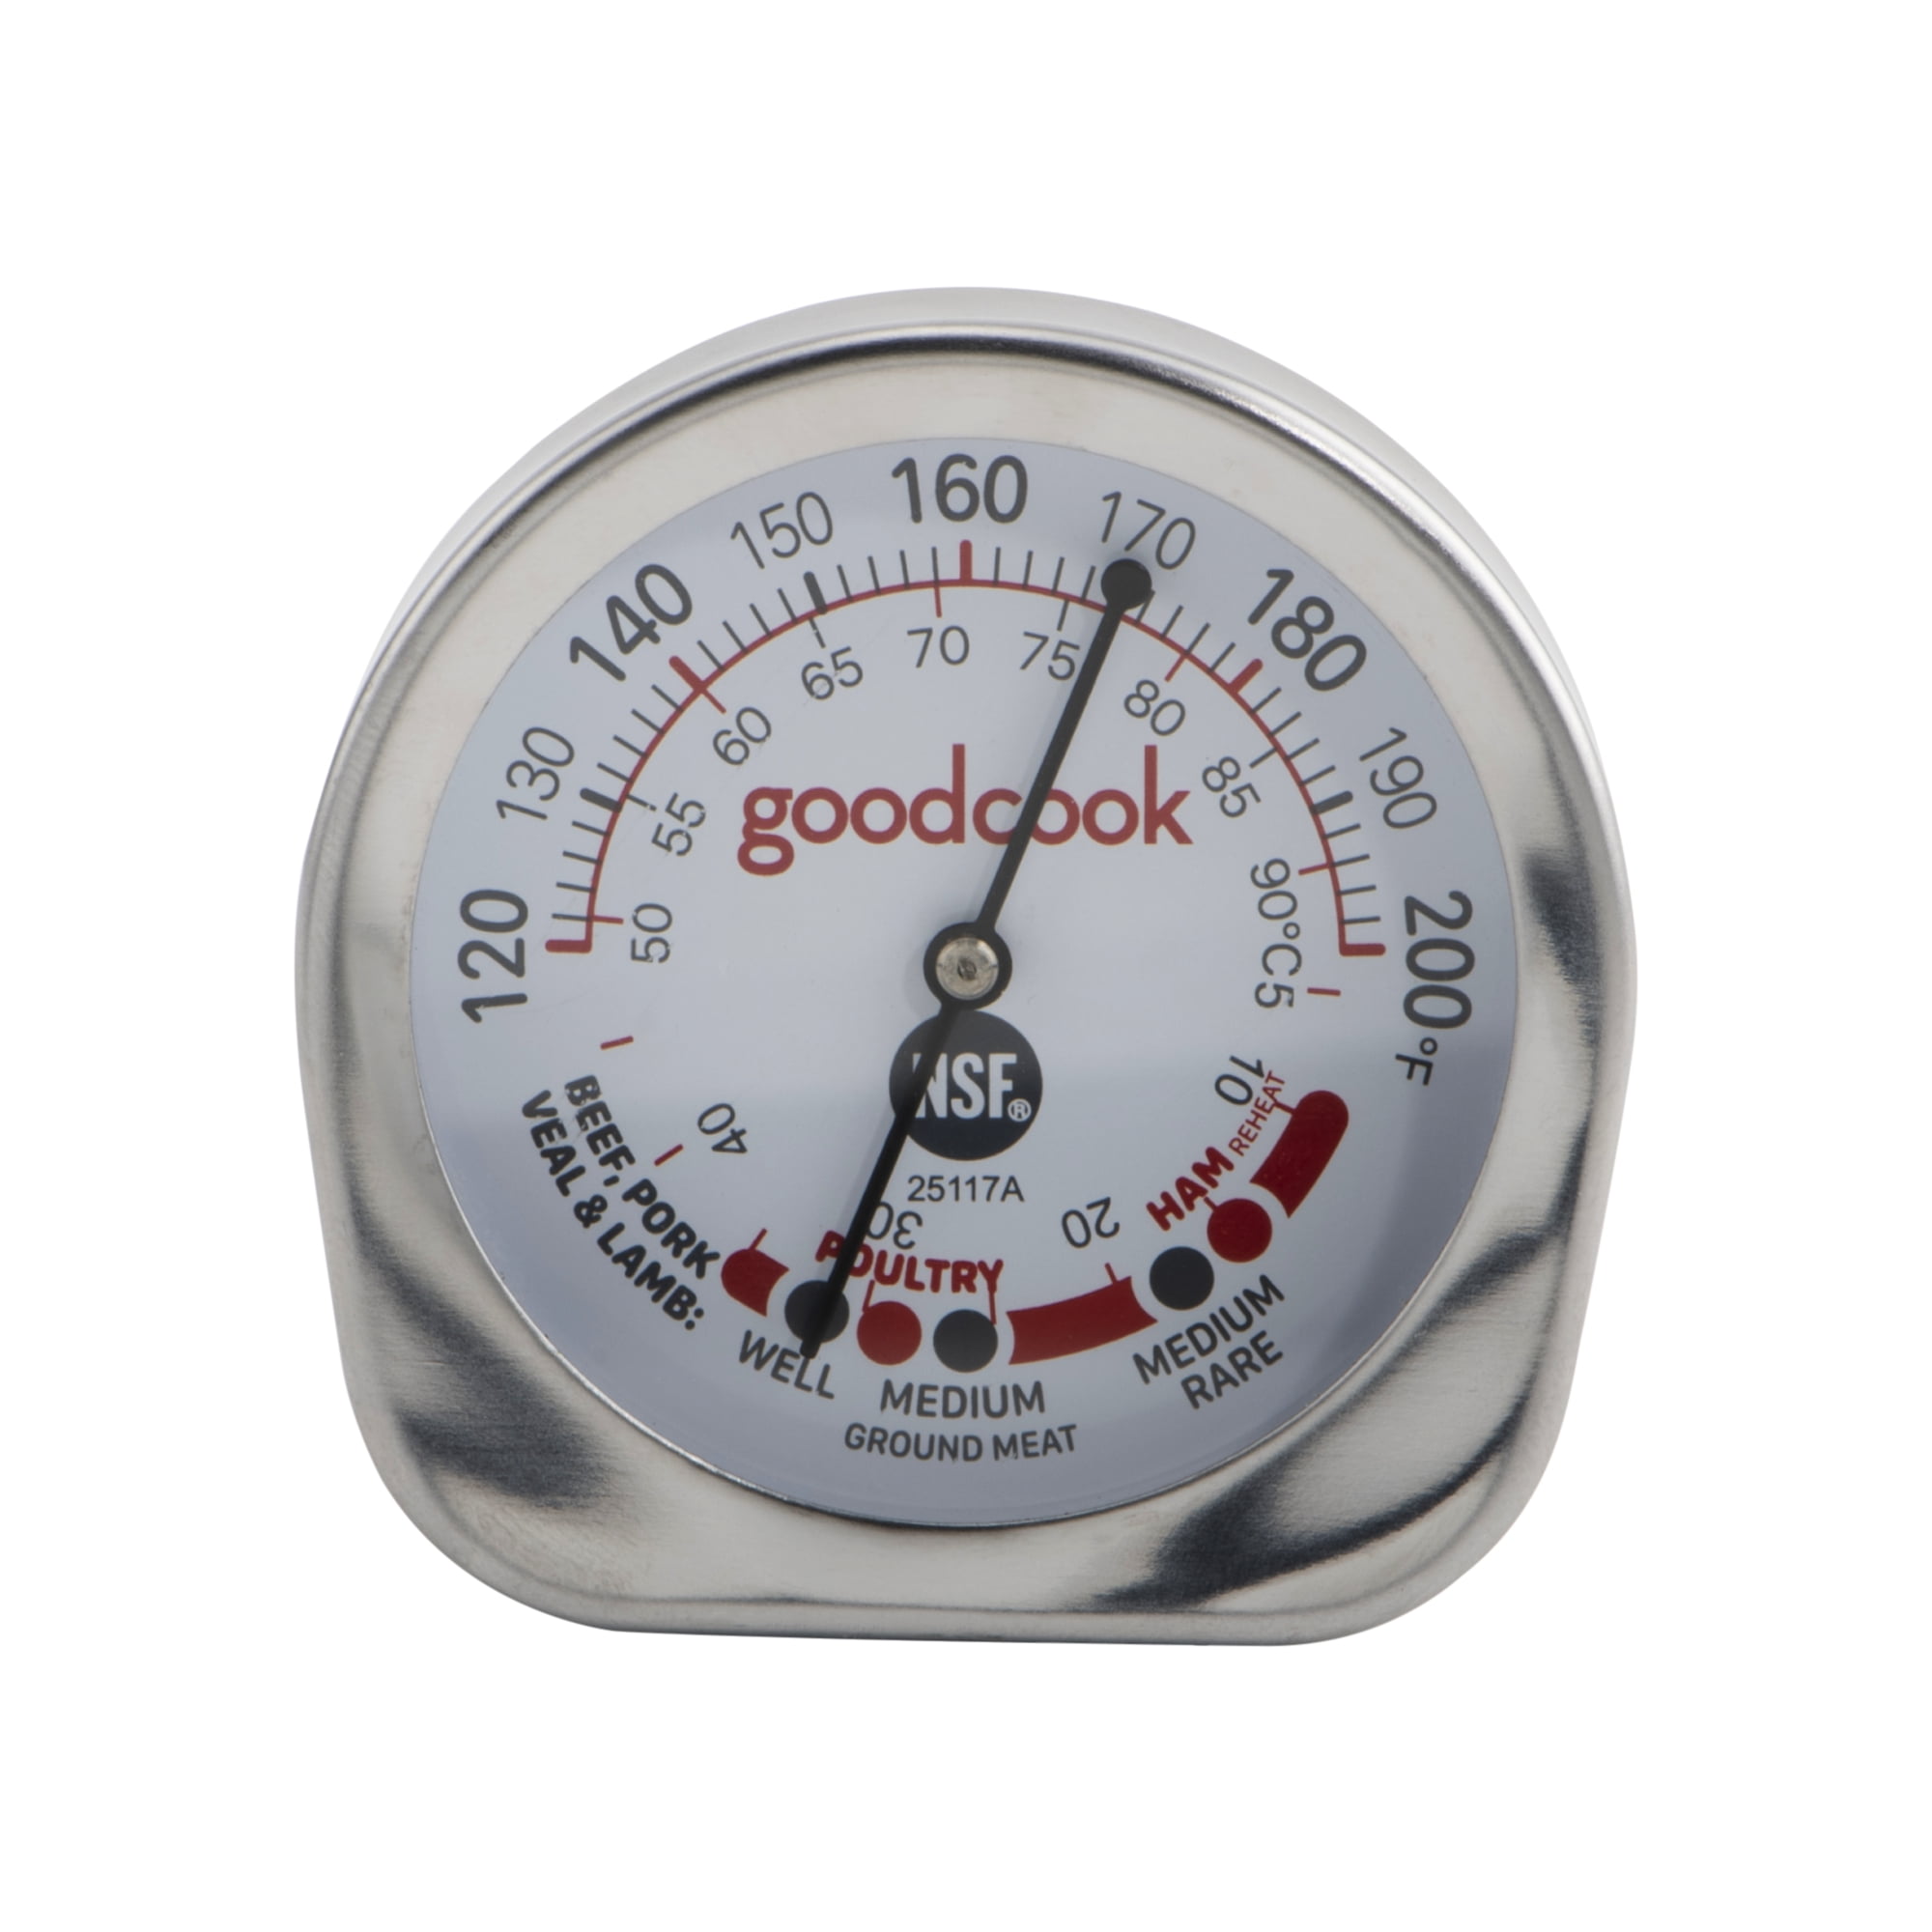 Grillmark 11391A Analog Stainless Steel Meat Thermometer